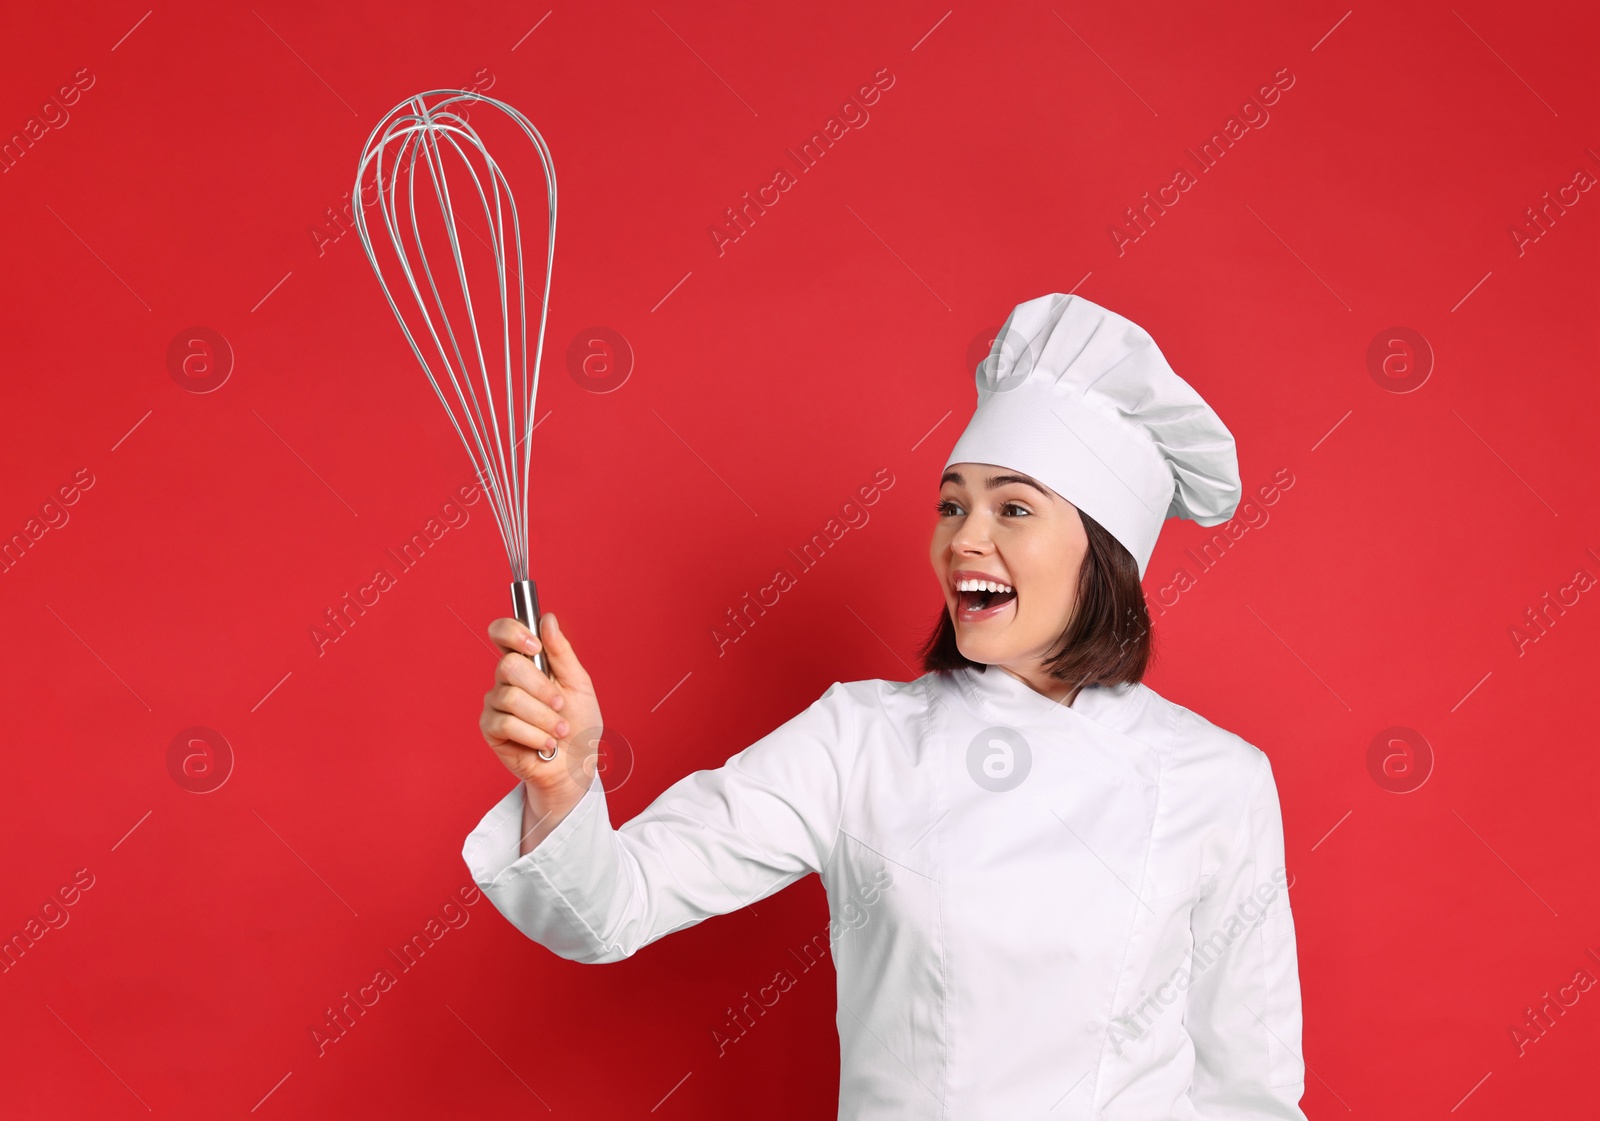 Image of Happy pastry chef with big whisk on red background